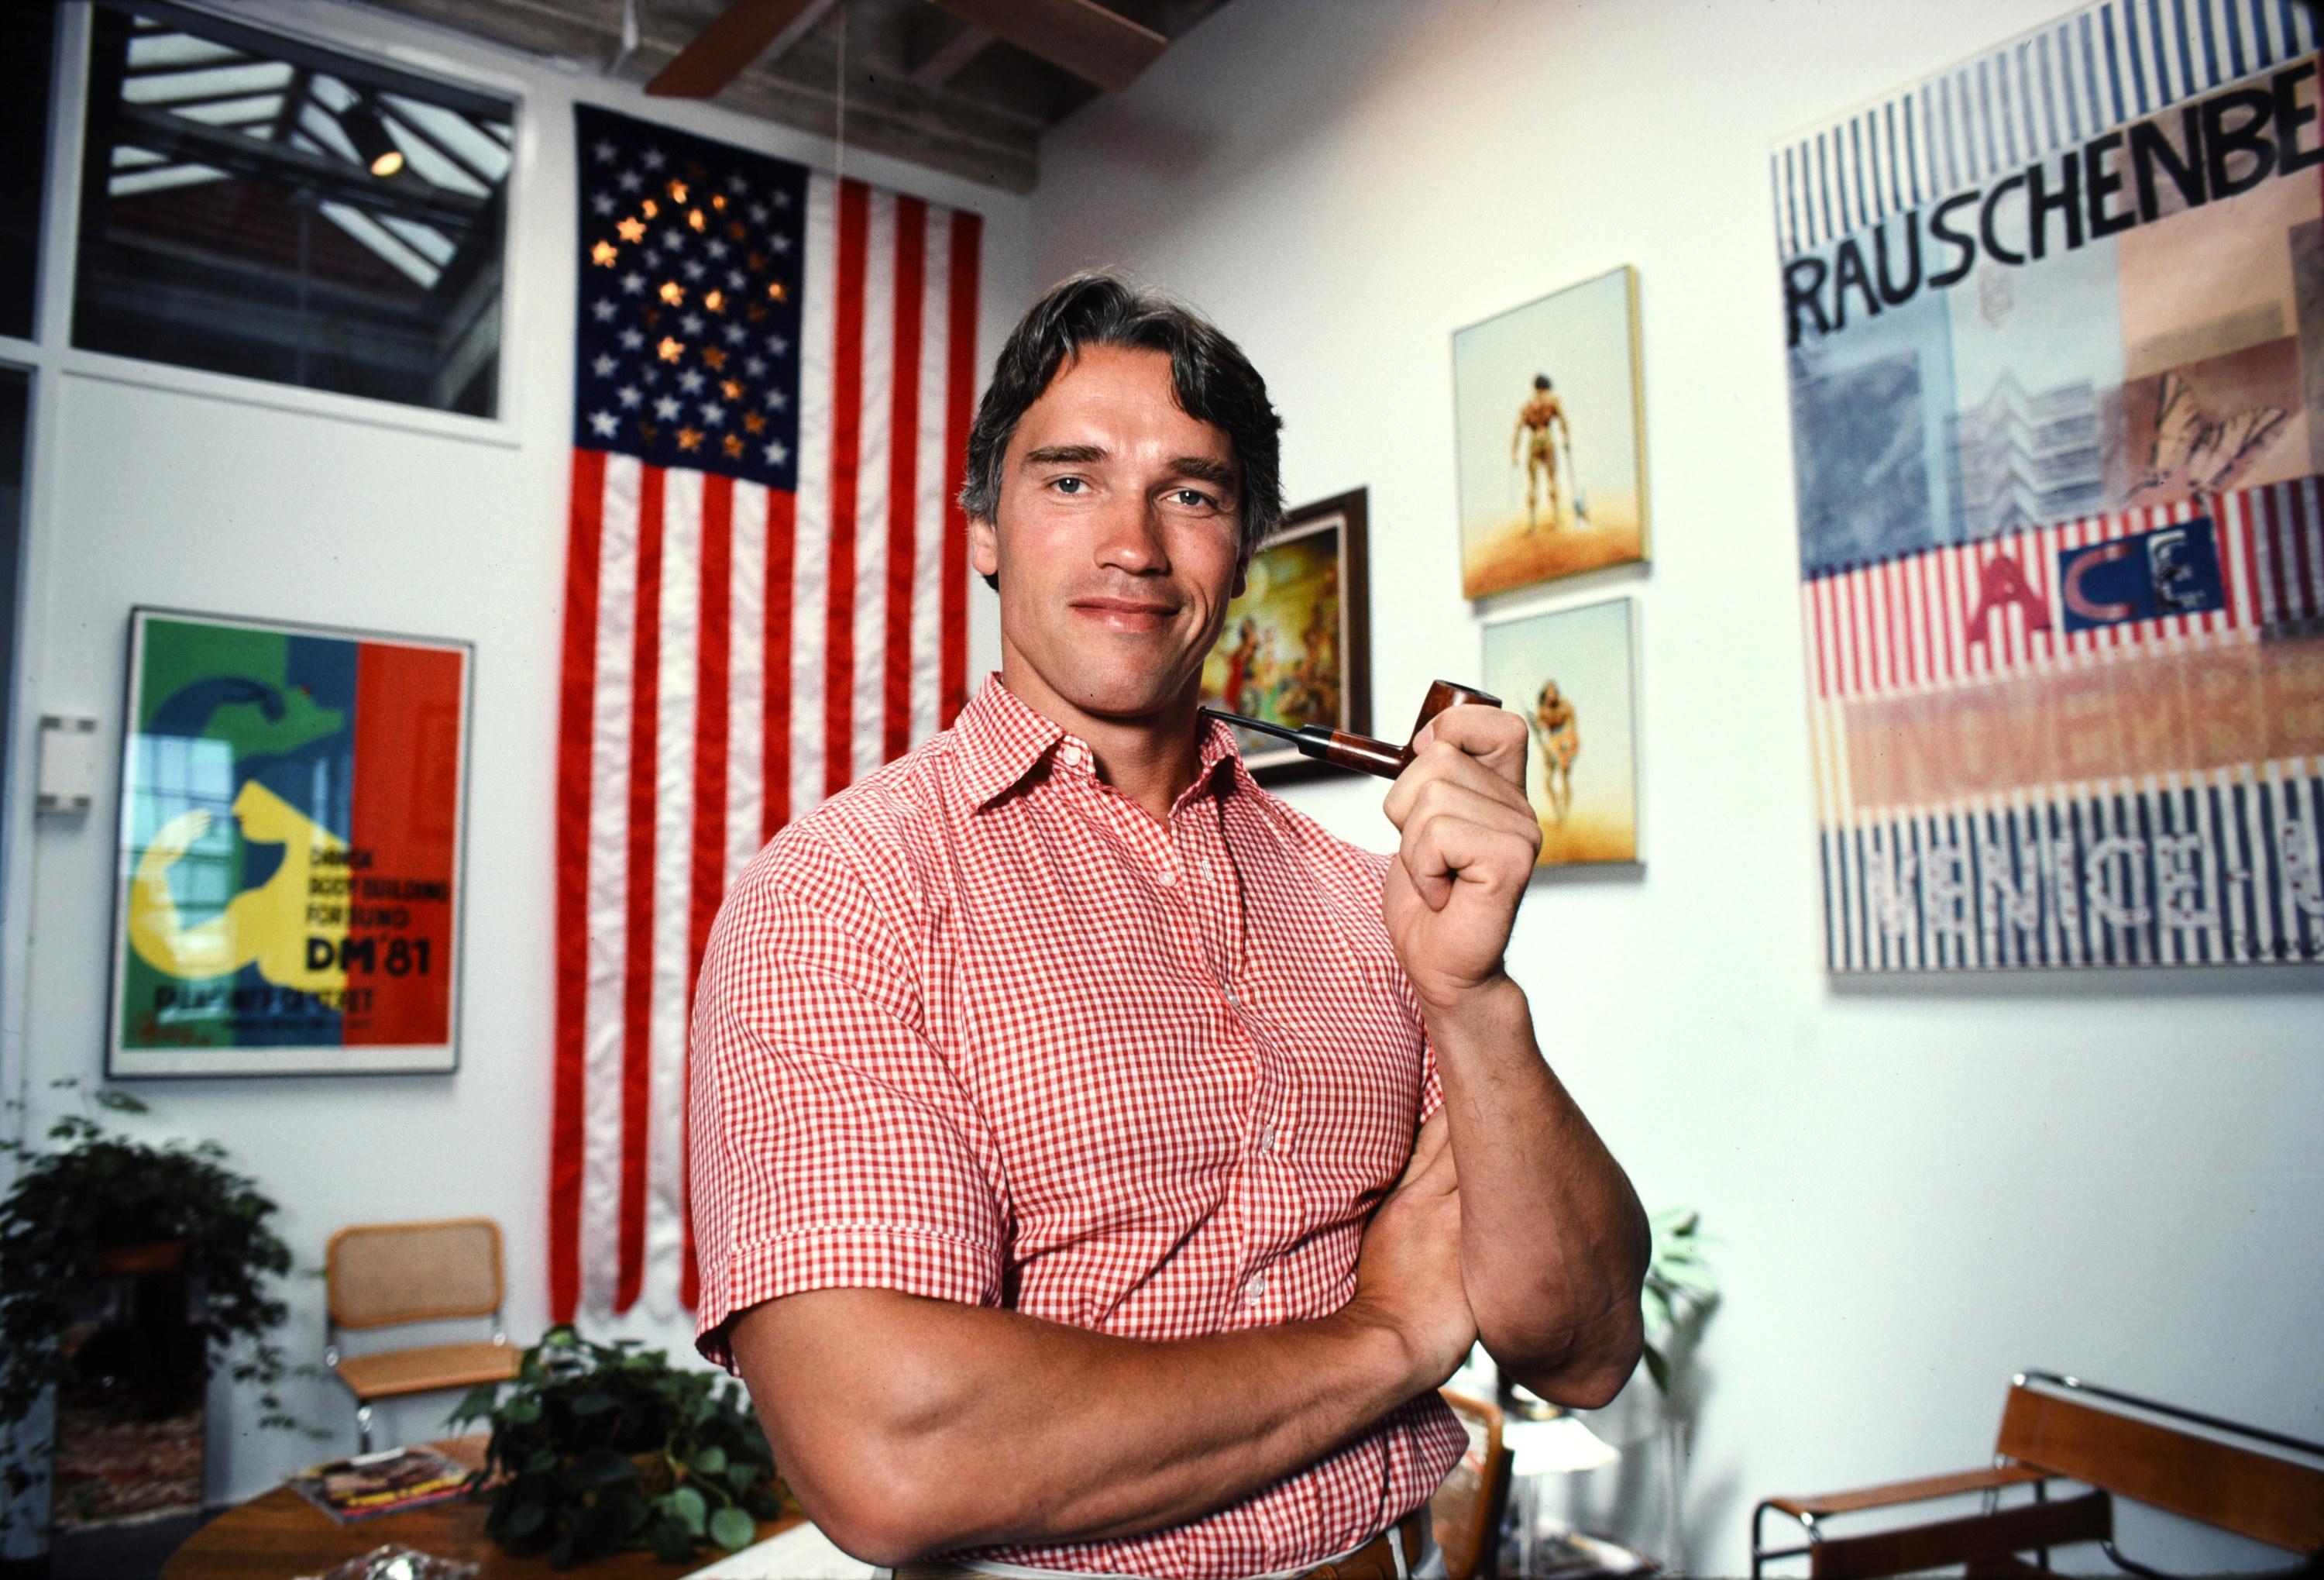 Arnold in a short-sleeved shirt holding a pipe